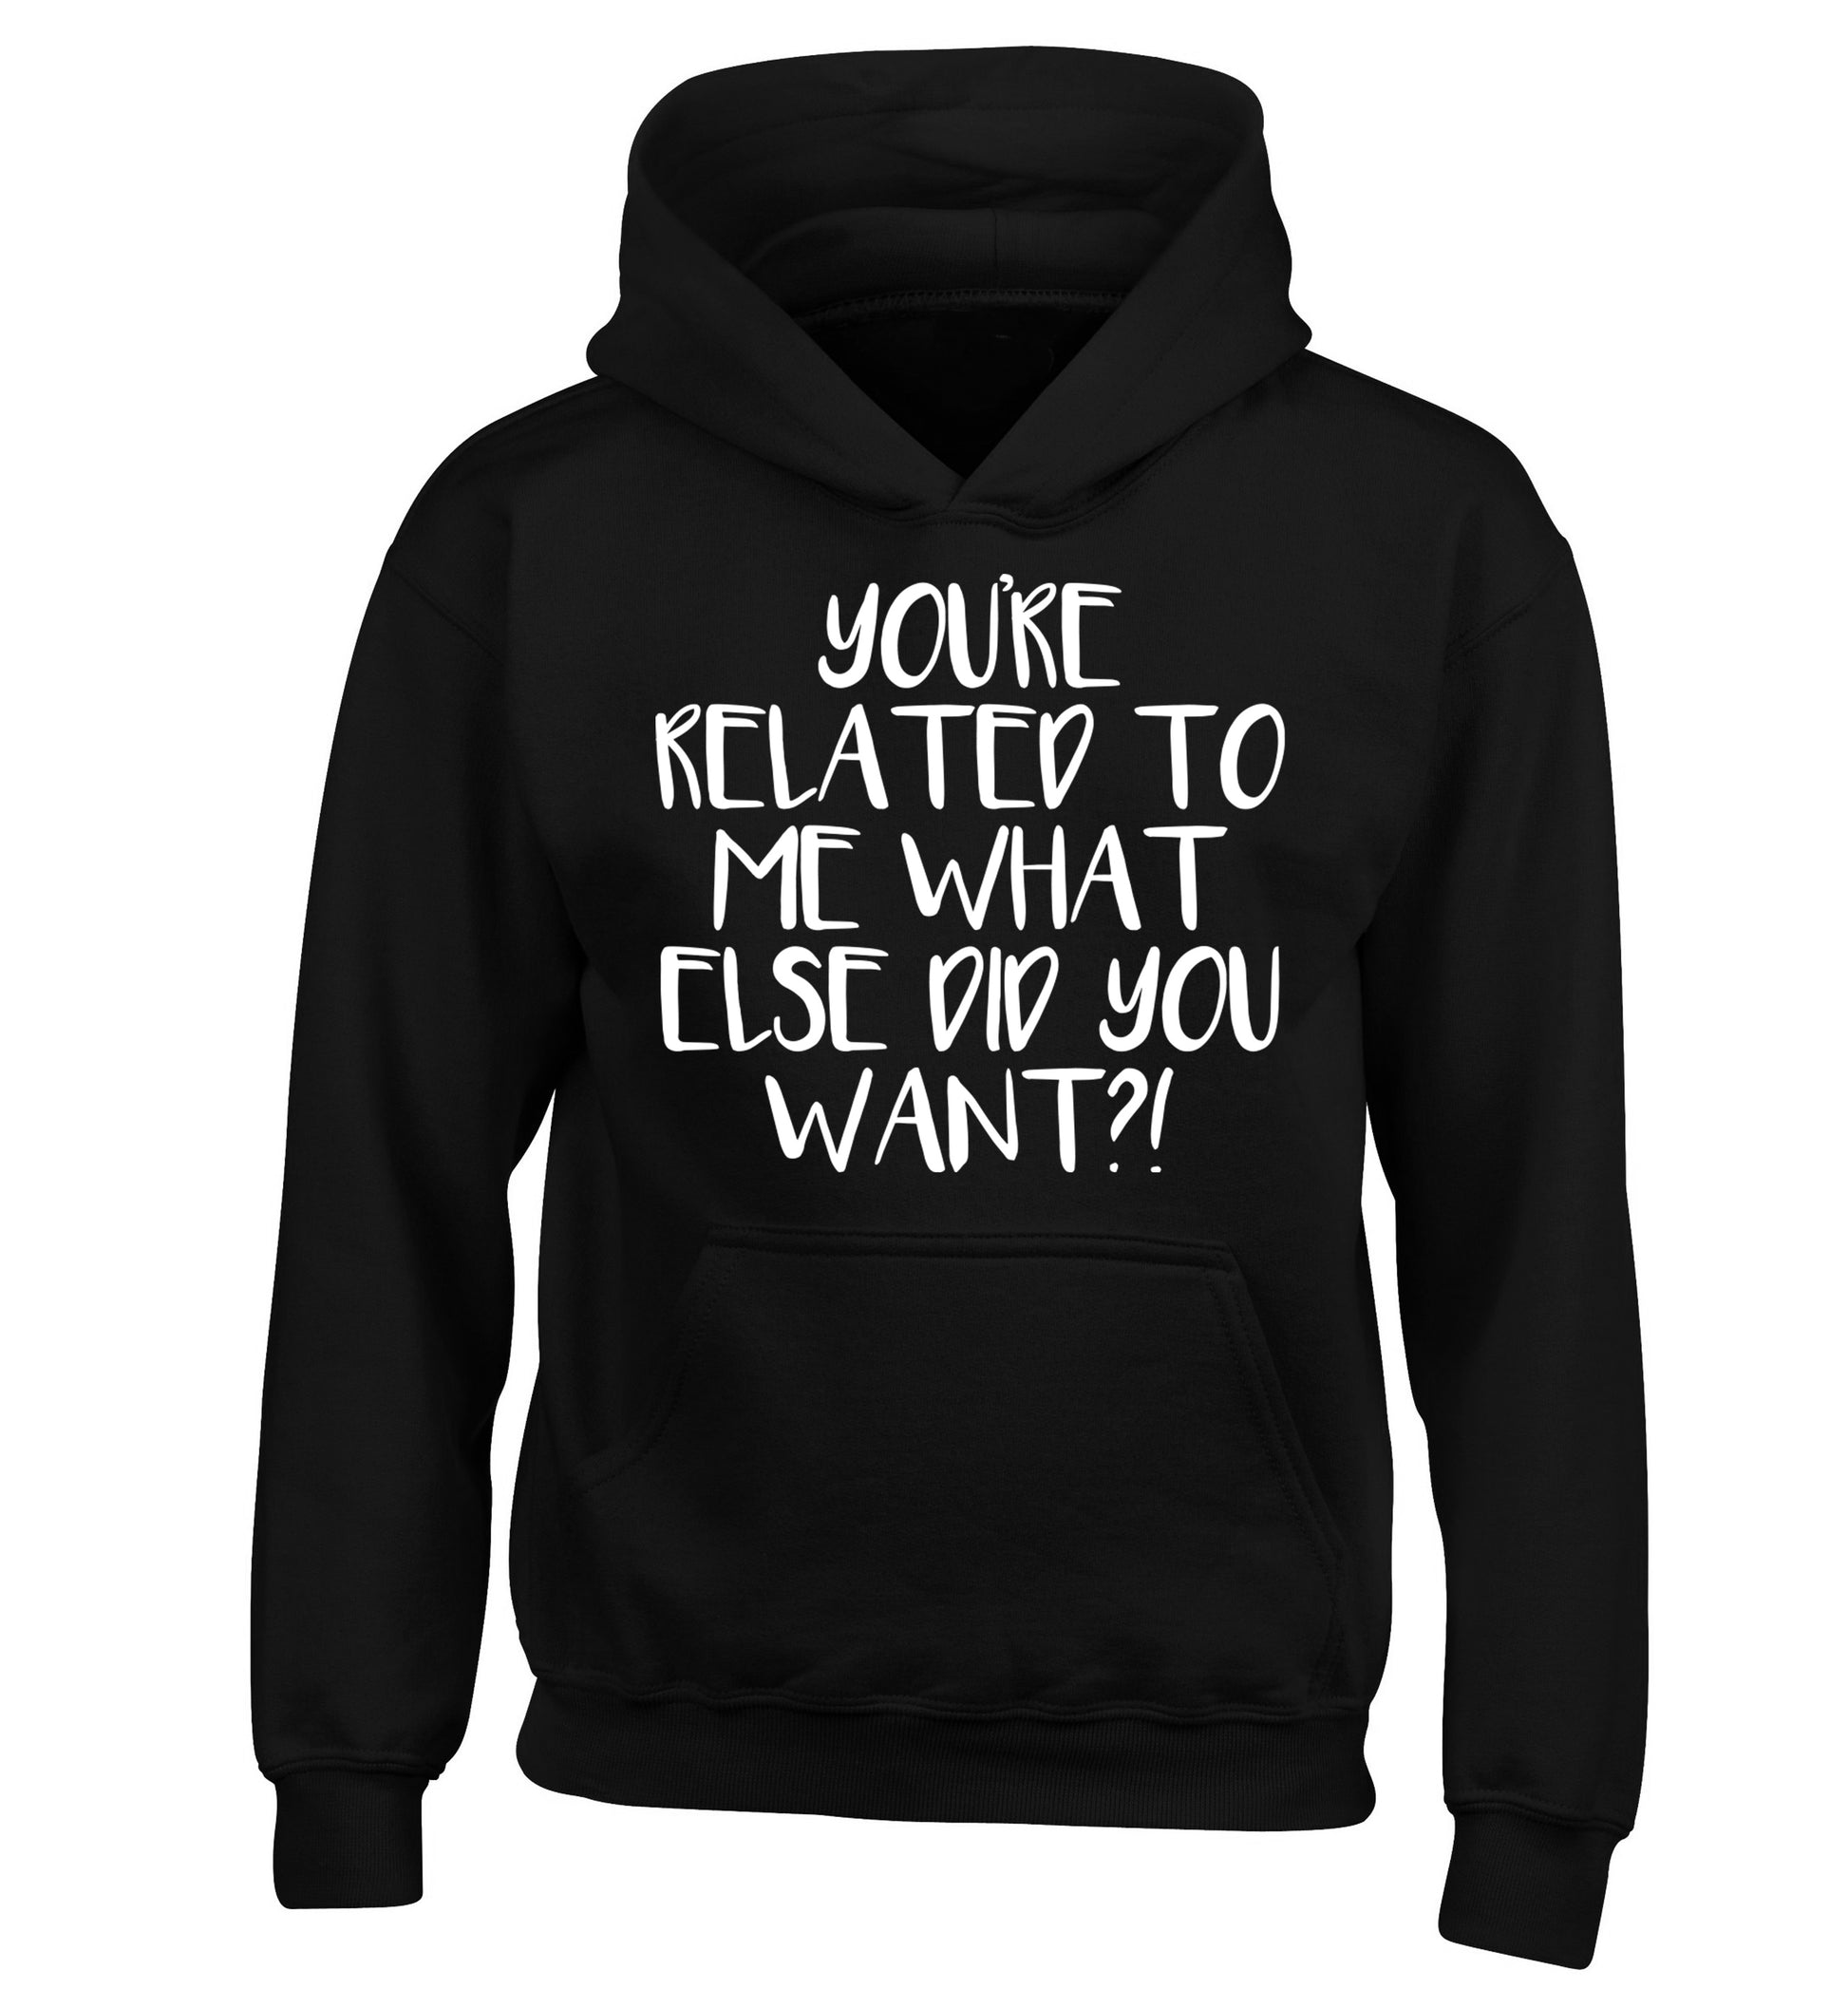 You're related to me what more do you want? children's black hoodie 12-13 Years